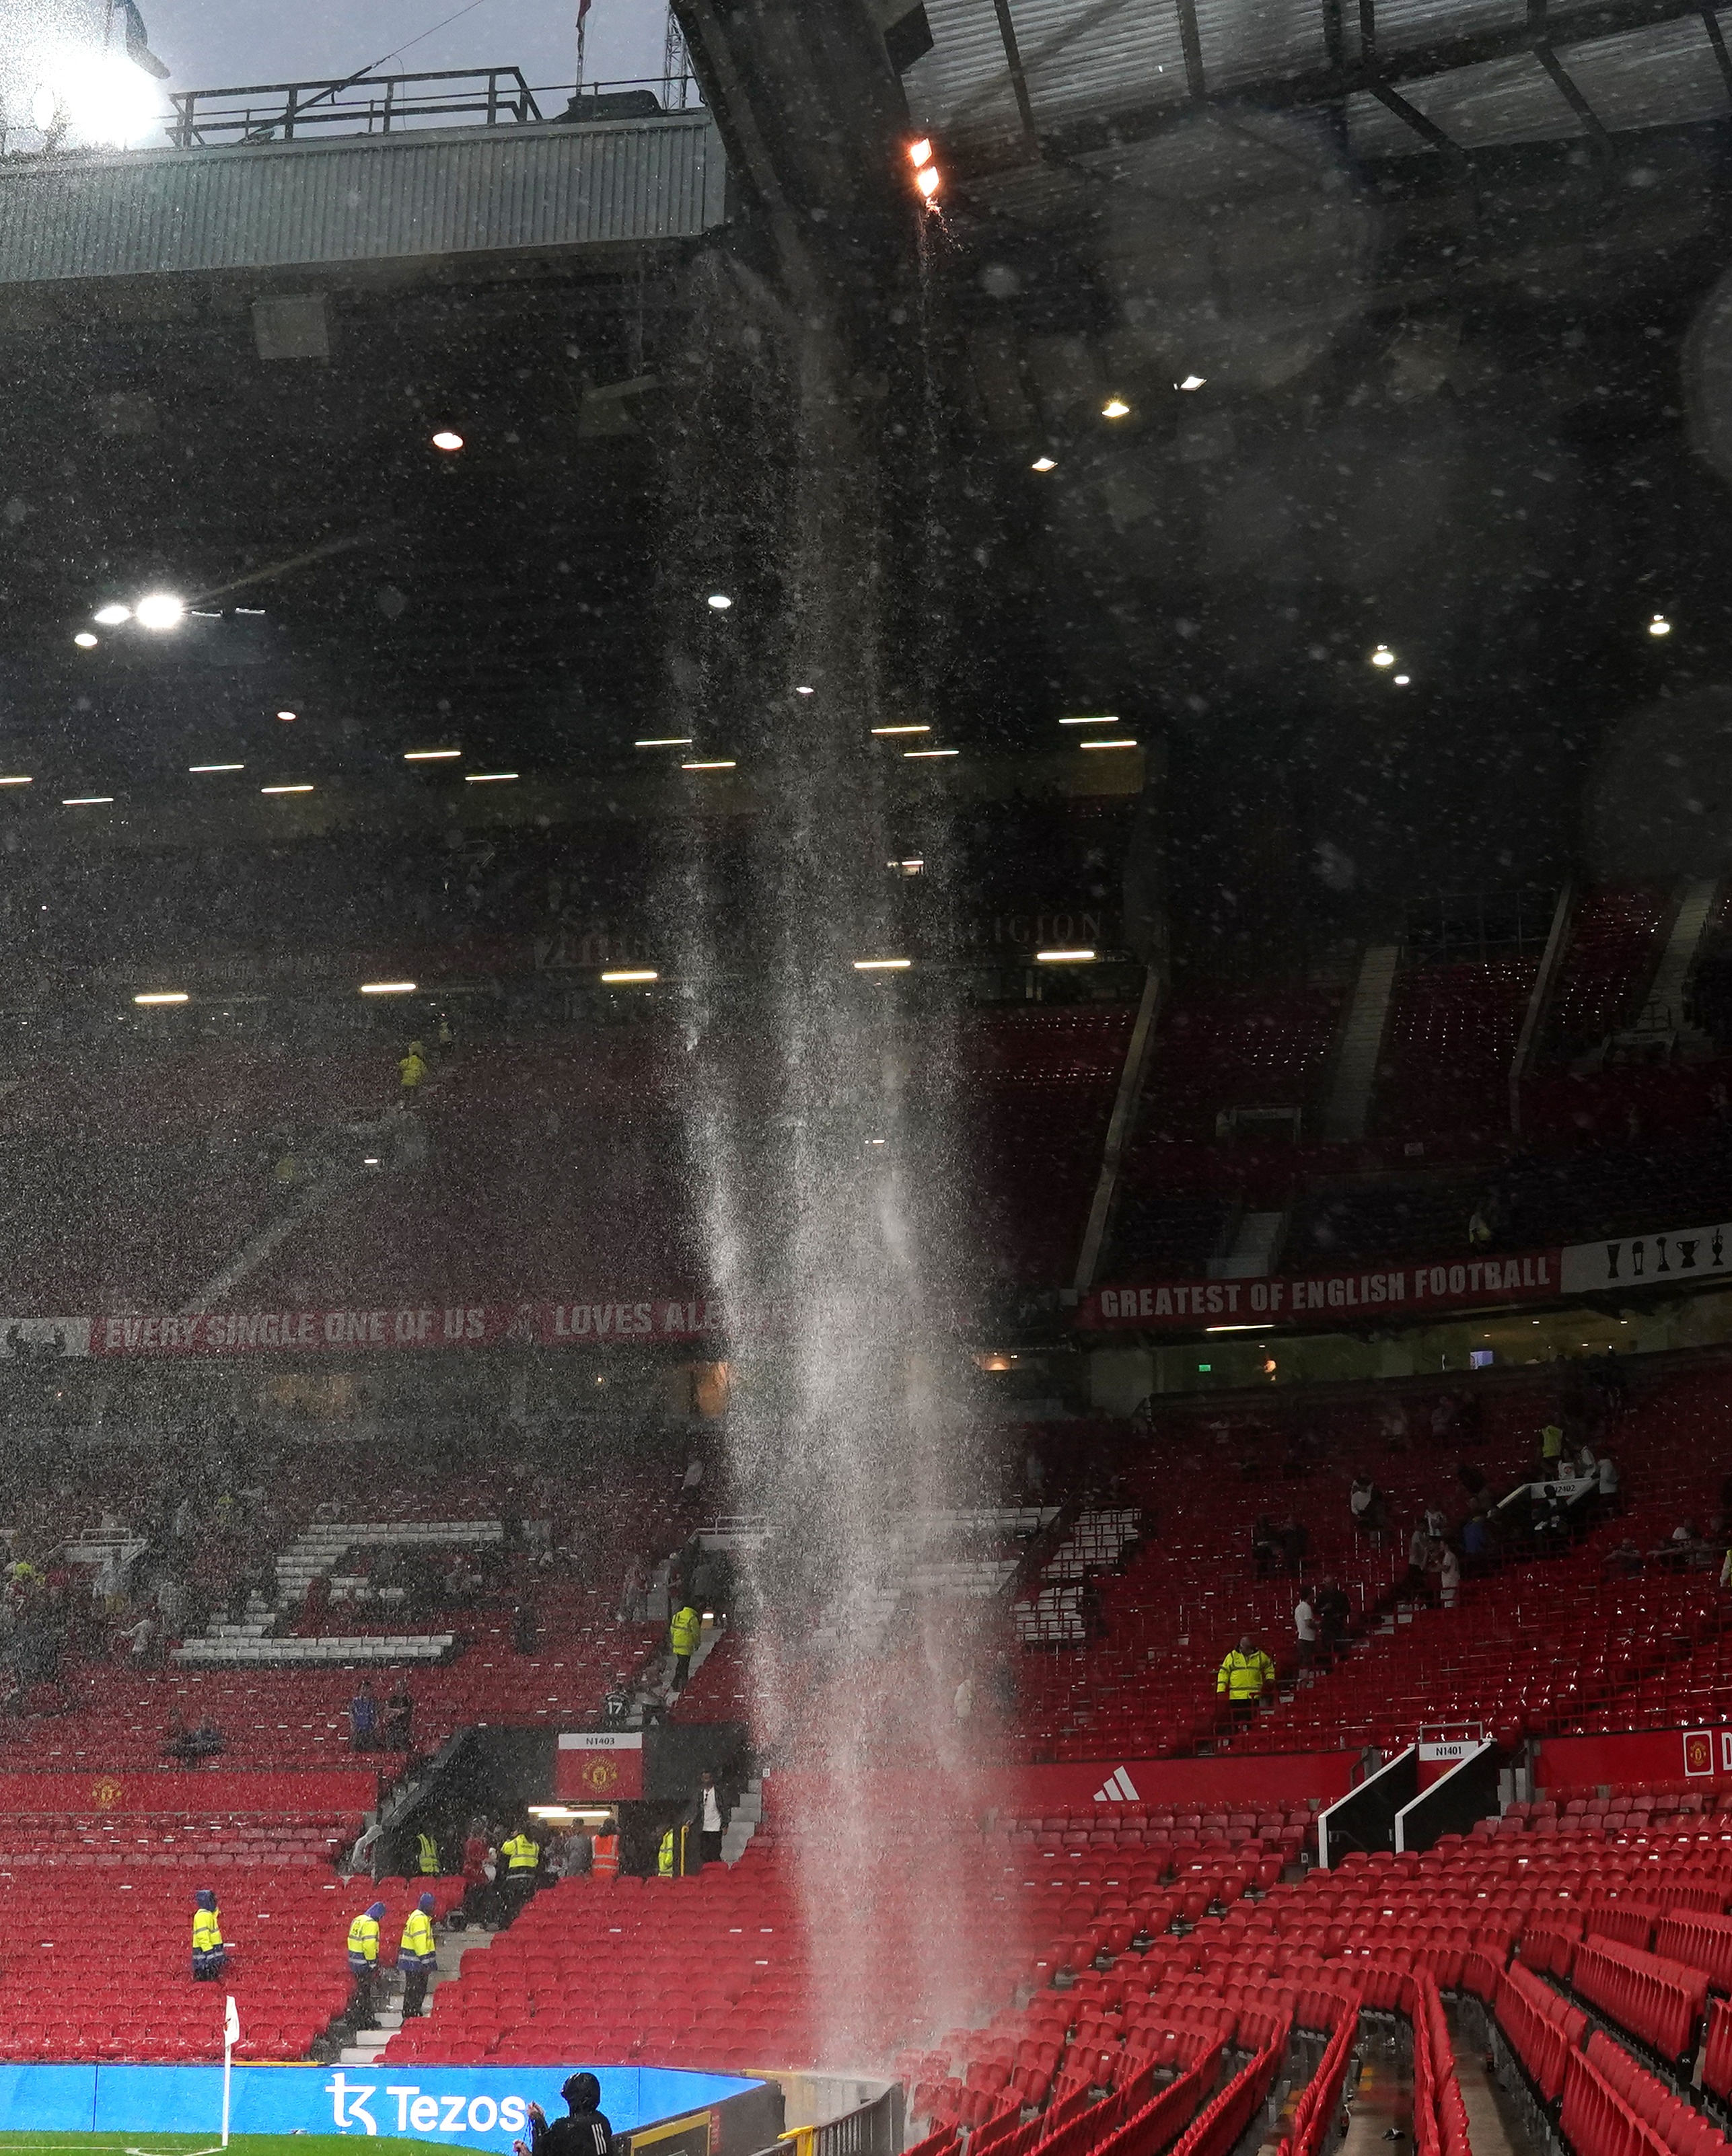 The Old Trafford roof leaked as a storm came in after Manchester United's defeat to Arsenal